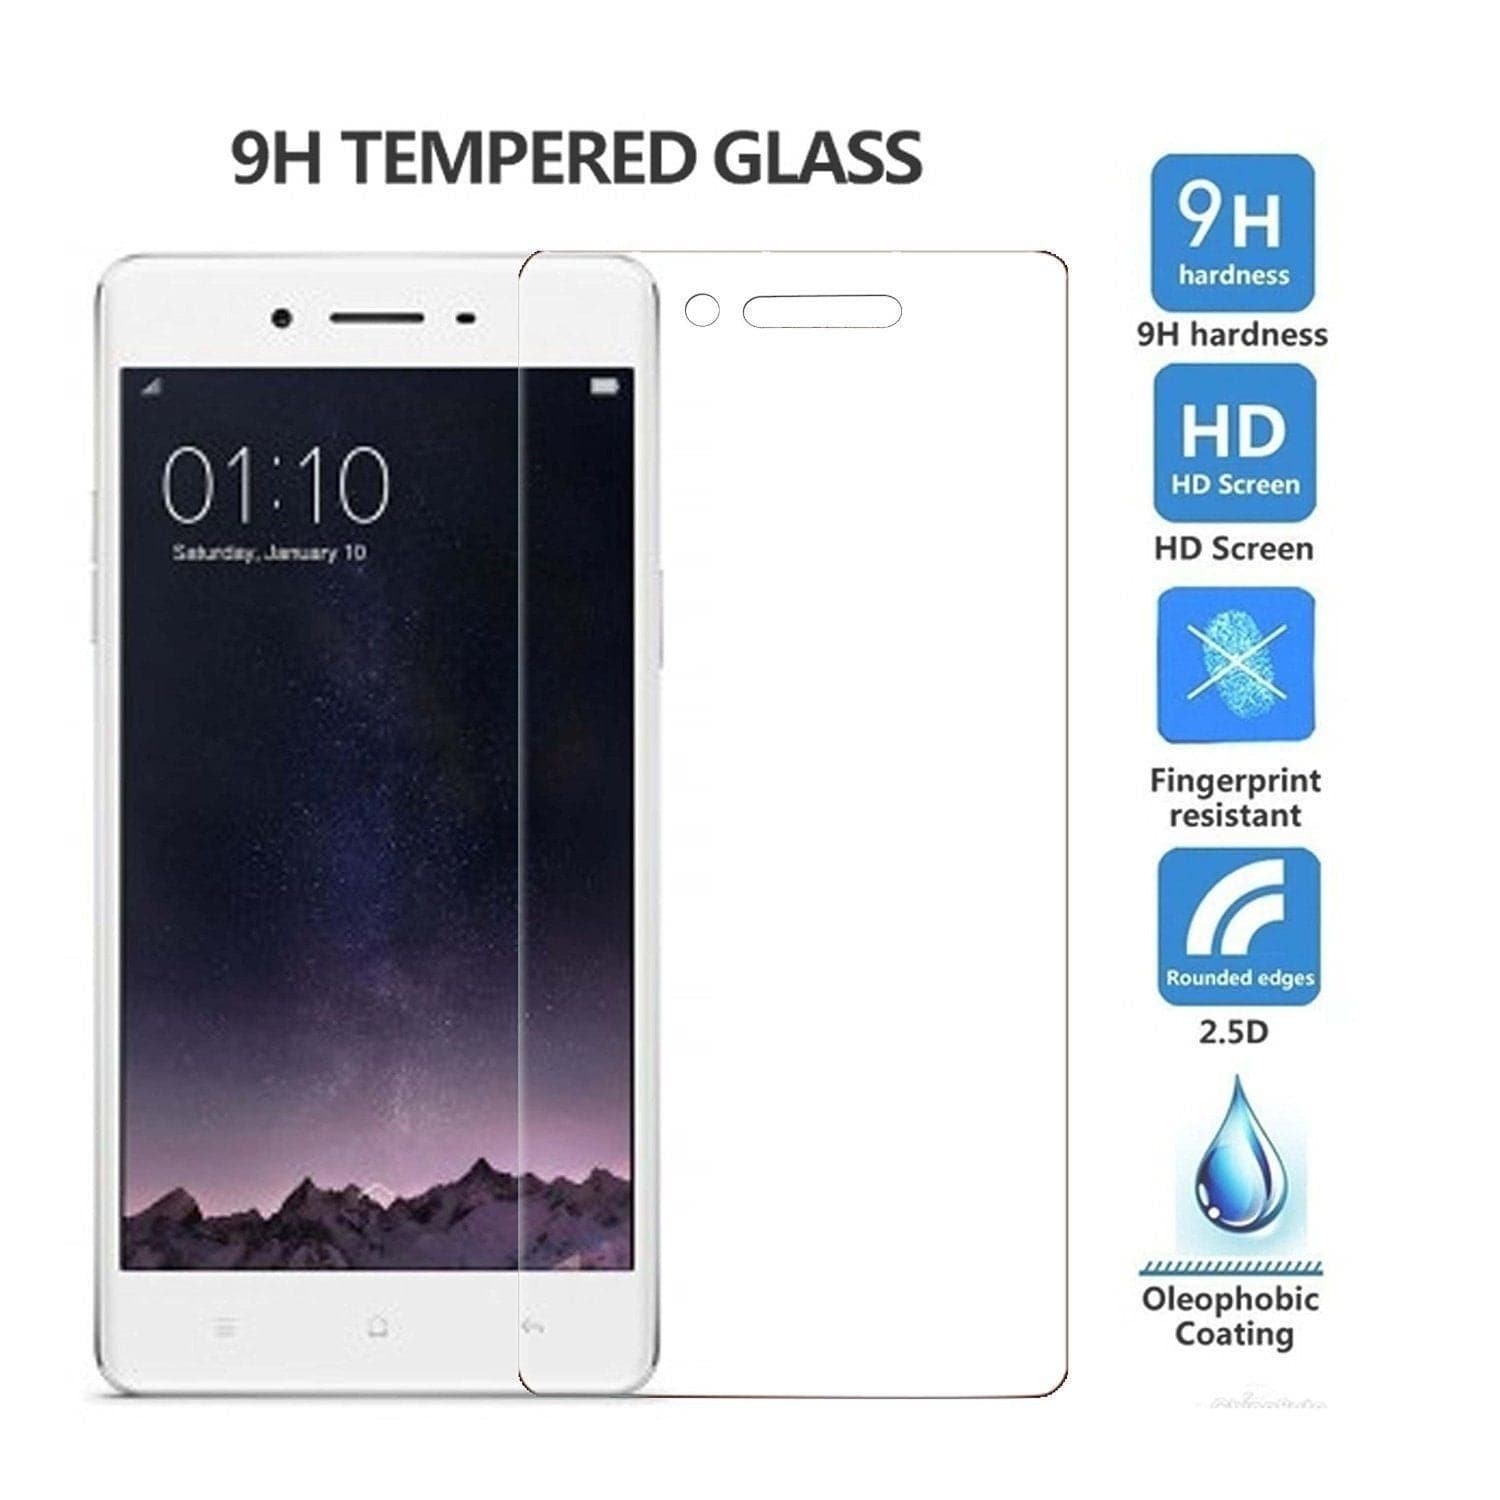 Oppo Tempered Glass Protector for Oppo F1,Oppo Neo7,Oppo Neo5 ,Oppo F1s/A59 ,Oppo A37